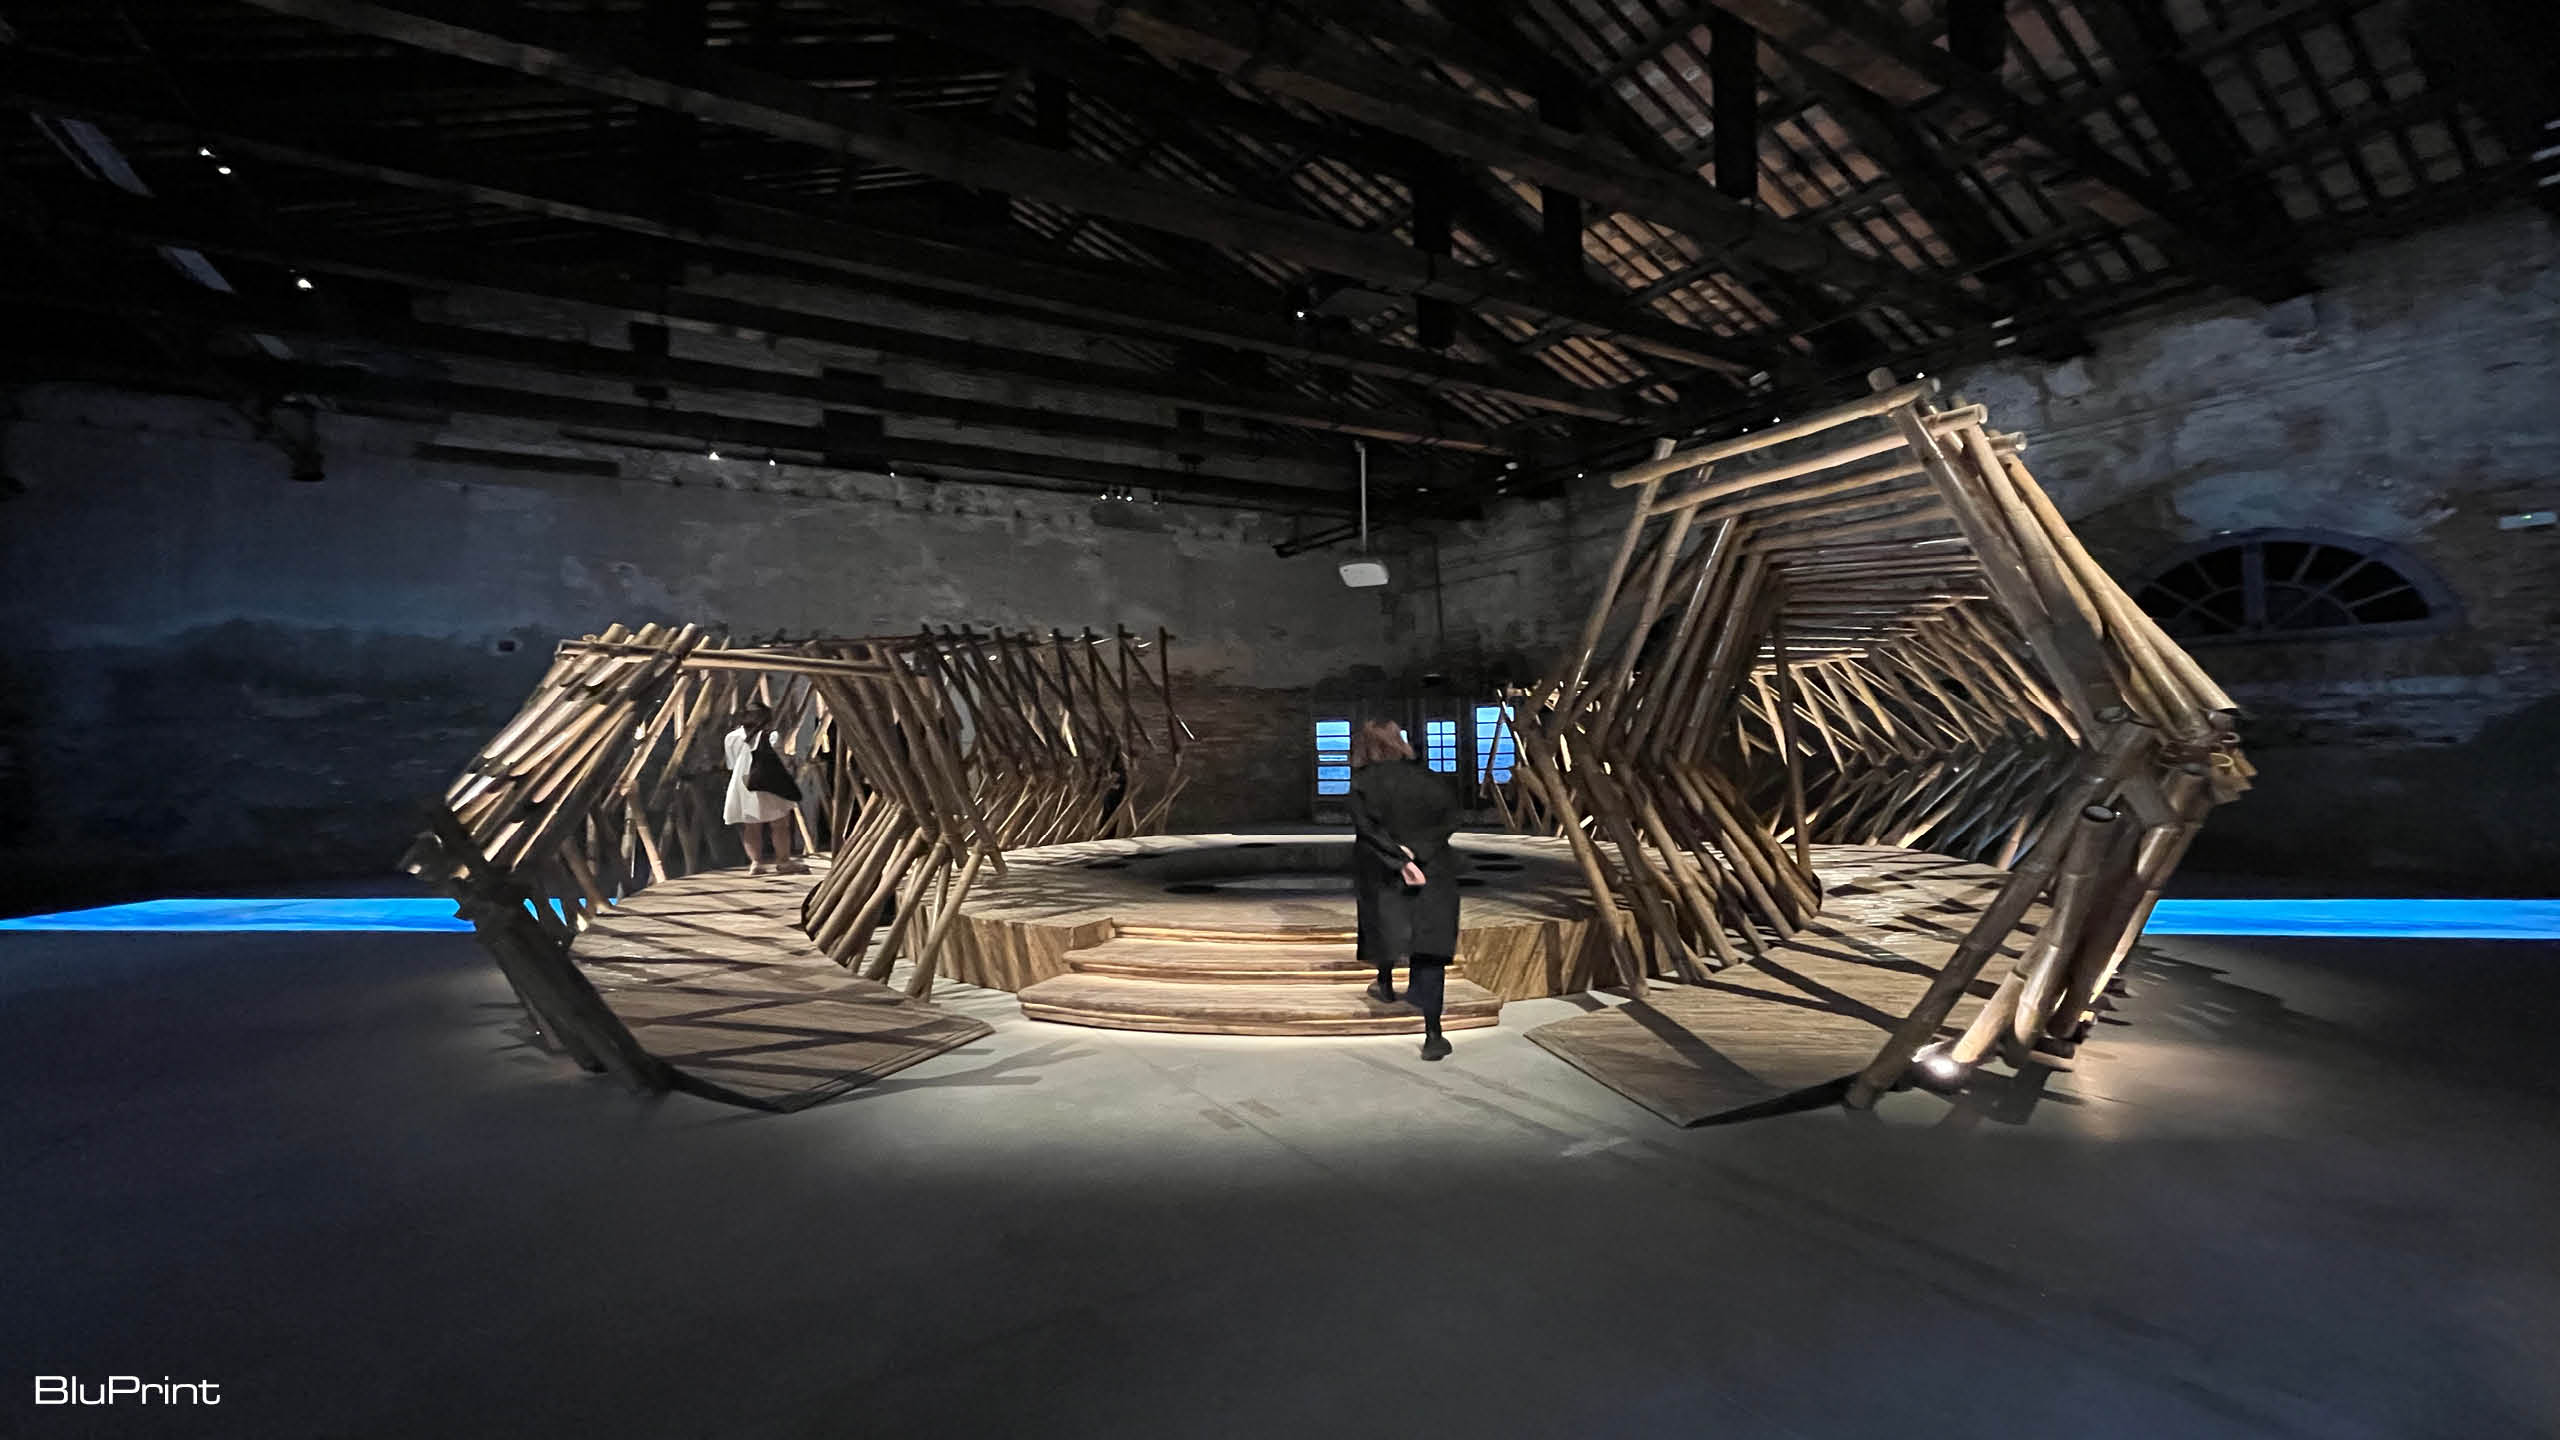 The Philippine Pavilion at the Architecture Biennale